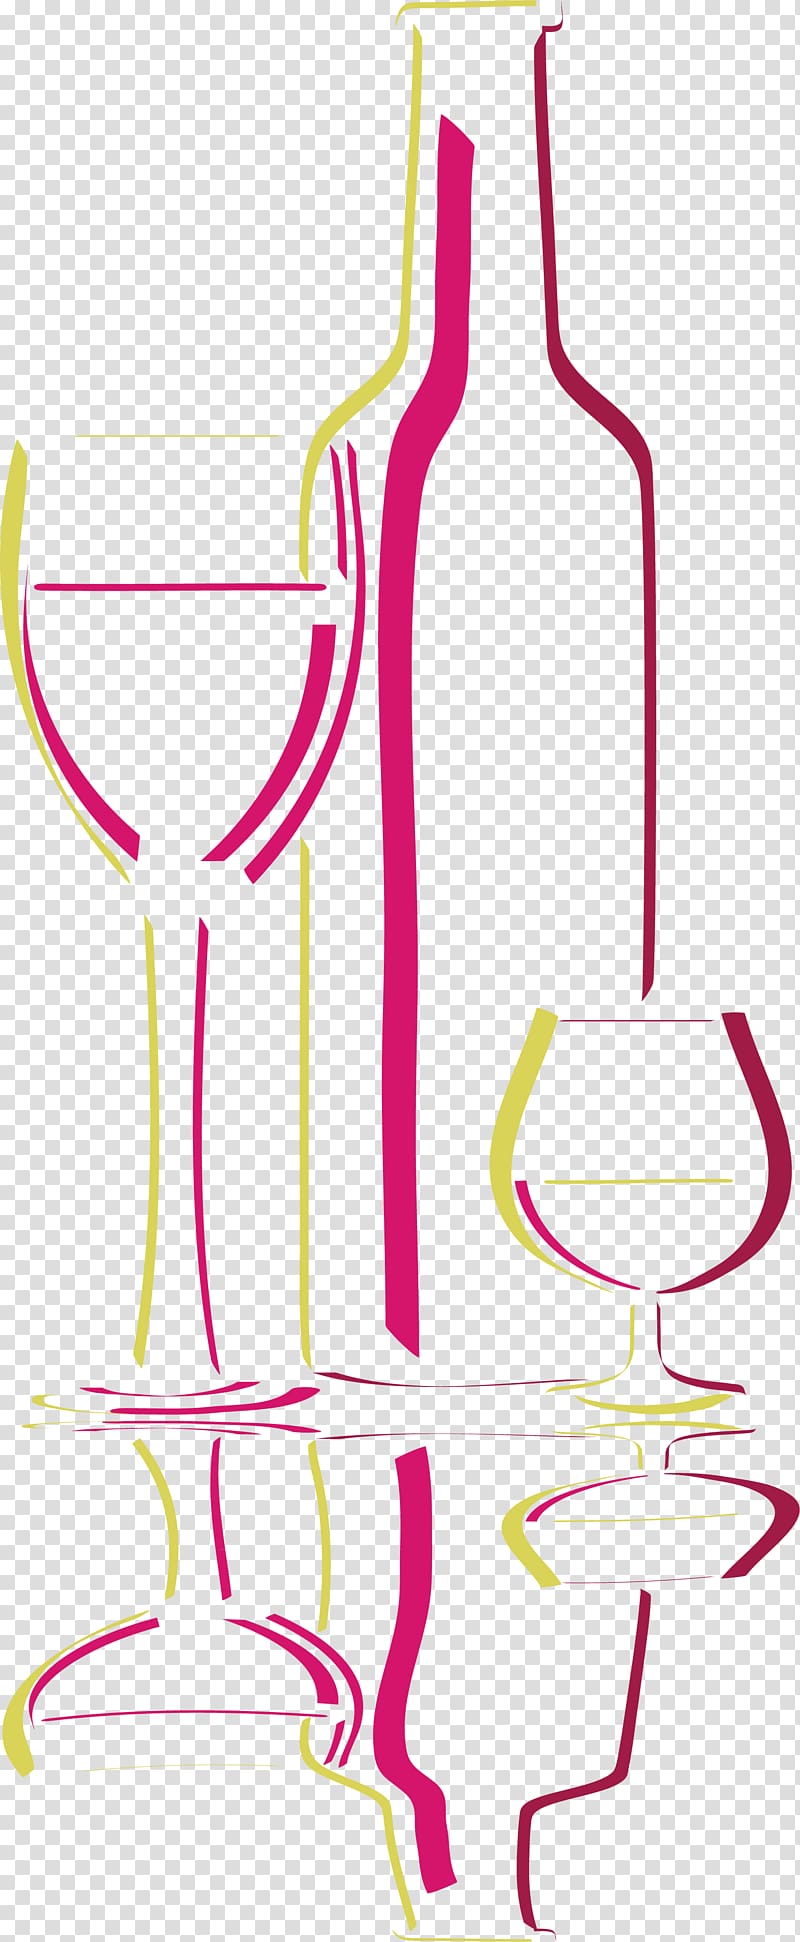 Wine glass Bottle, Creative wine glass bottle transparent background PNG clipart